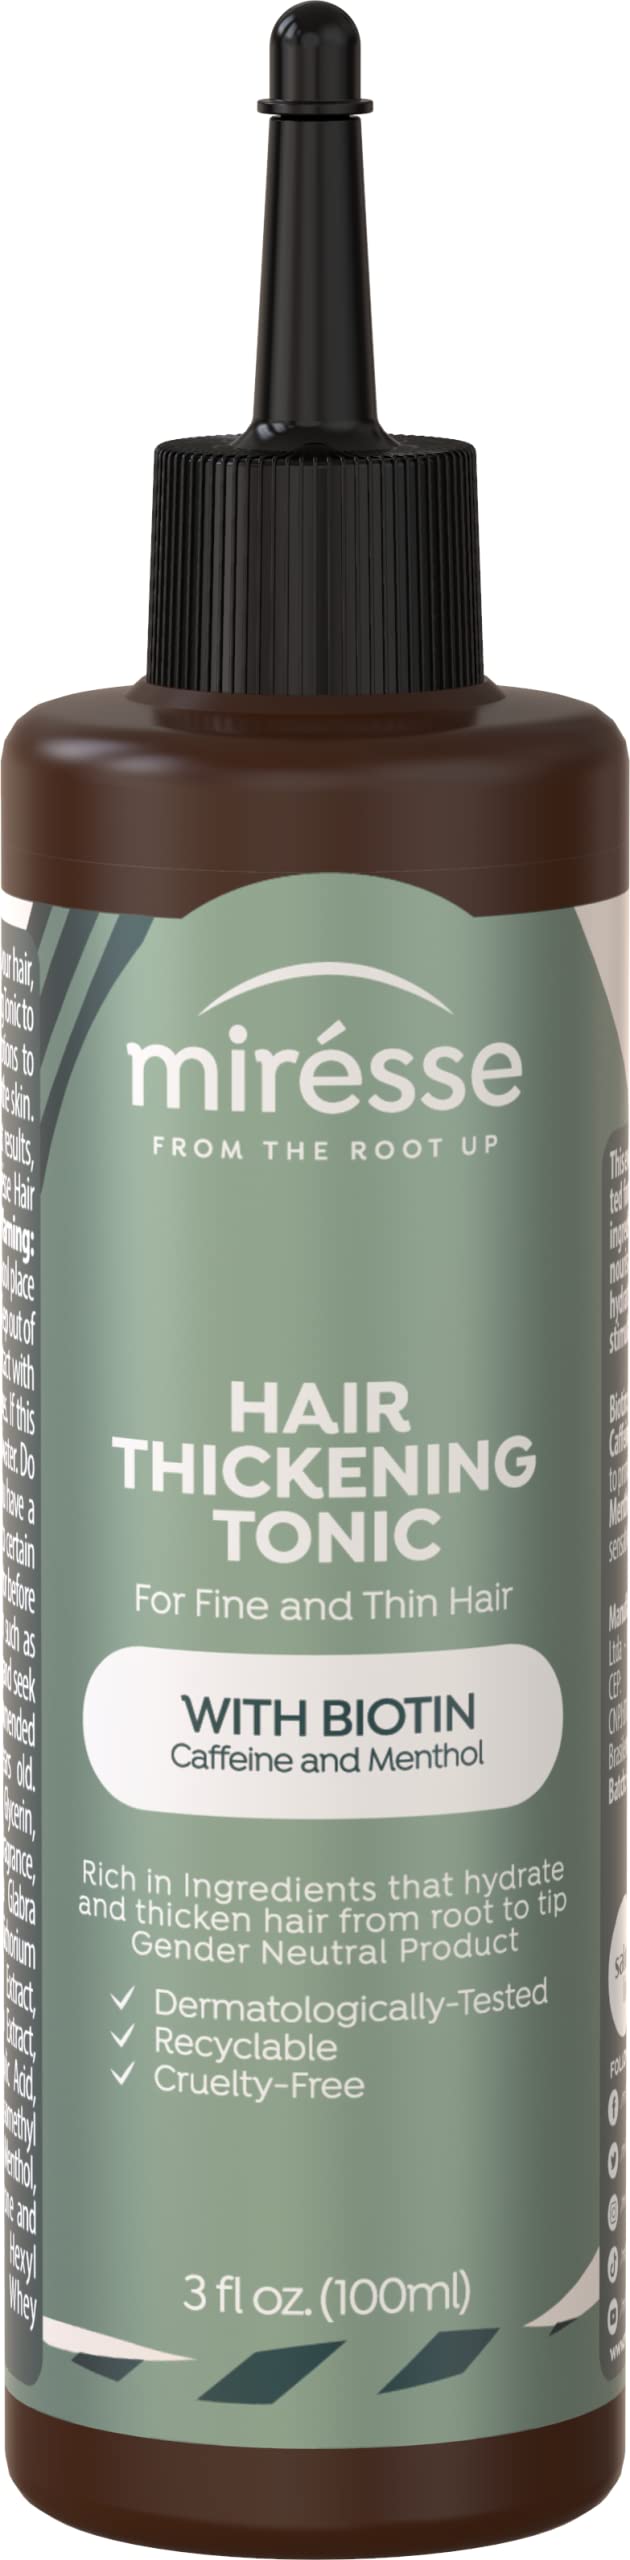 miresse MIRÉSSE - Pack of 2 Hyaluronic Acid Hair Thickening Shampoo - Shampoo for Oily Hair - Biotin Treatment for Women and Men - Vegan and Cruelty-Free - Proven Results - 32 Fl oz